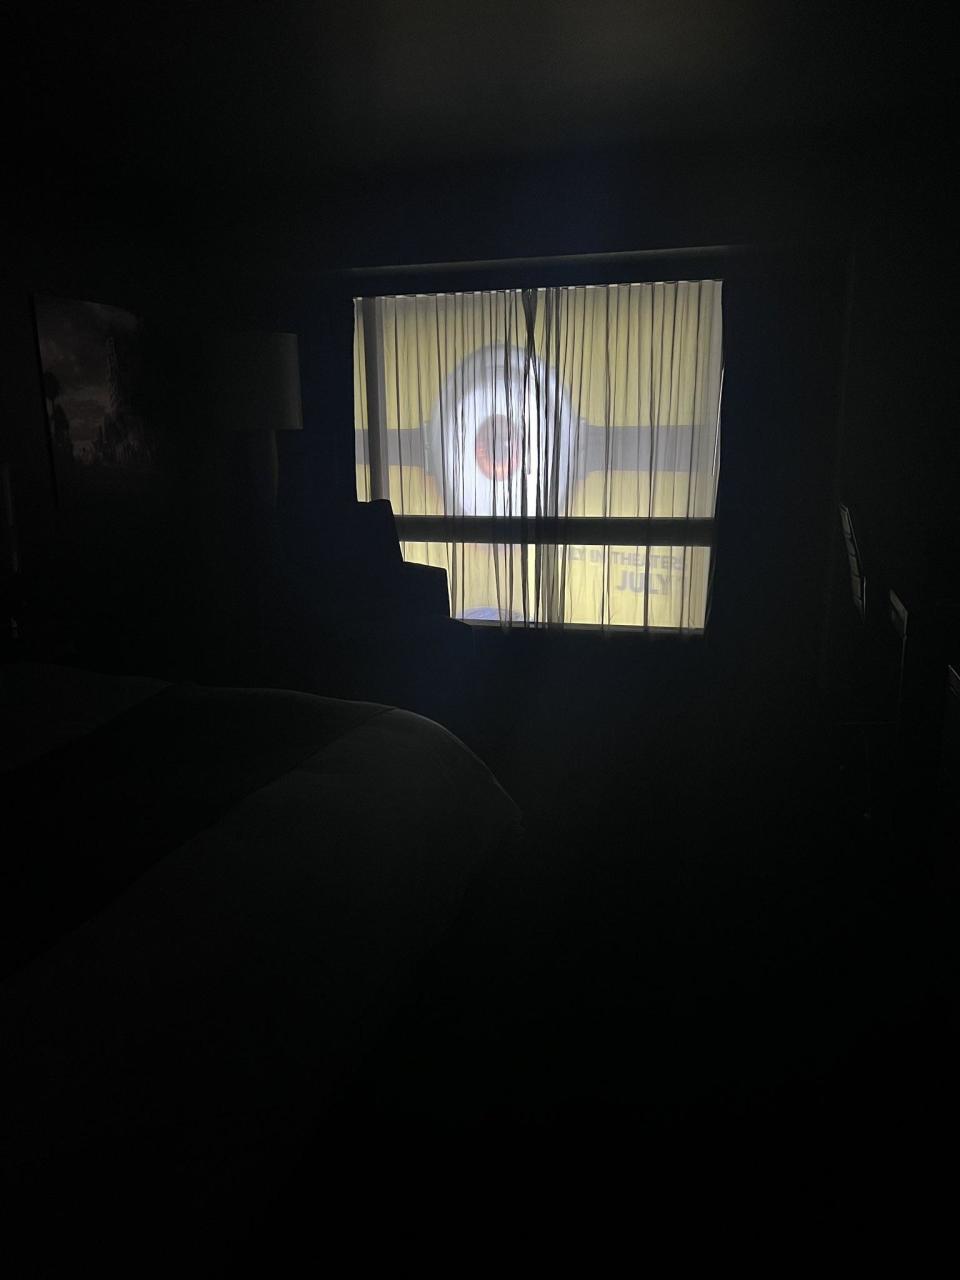 A giant eyeball looking into someone's window